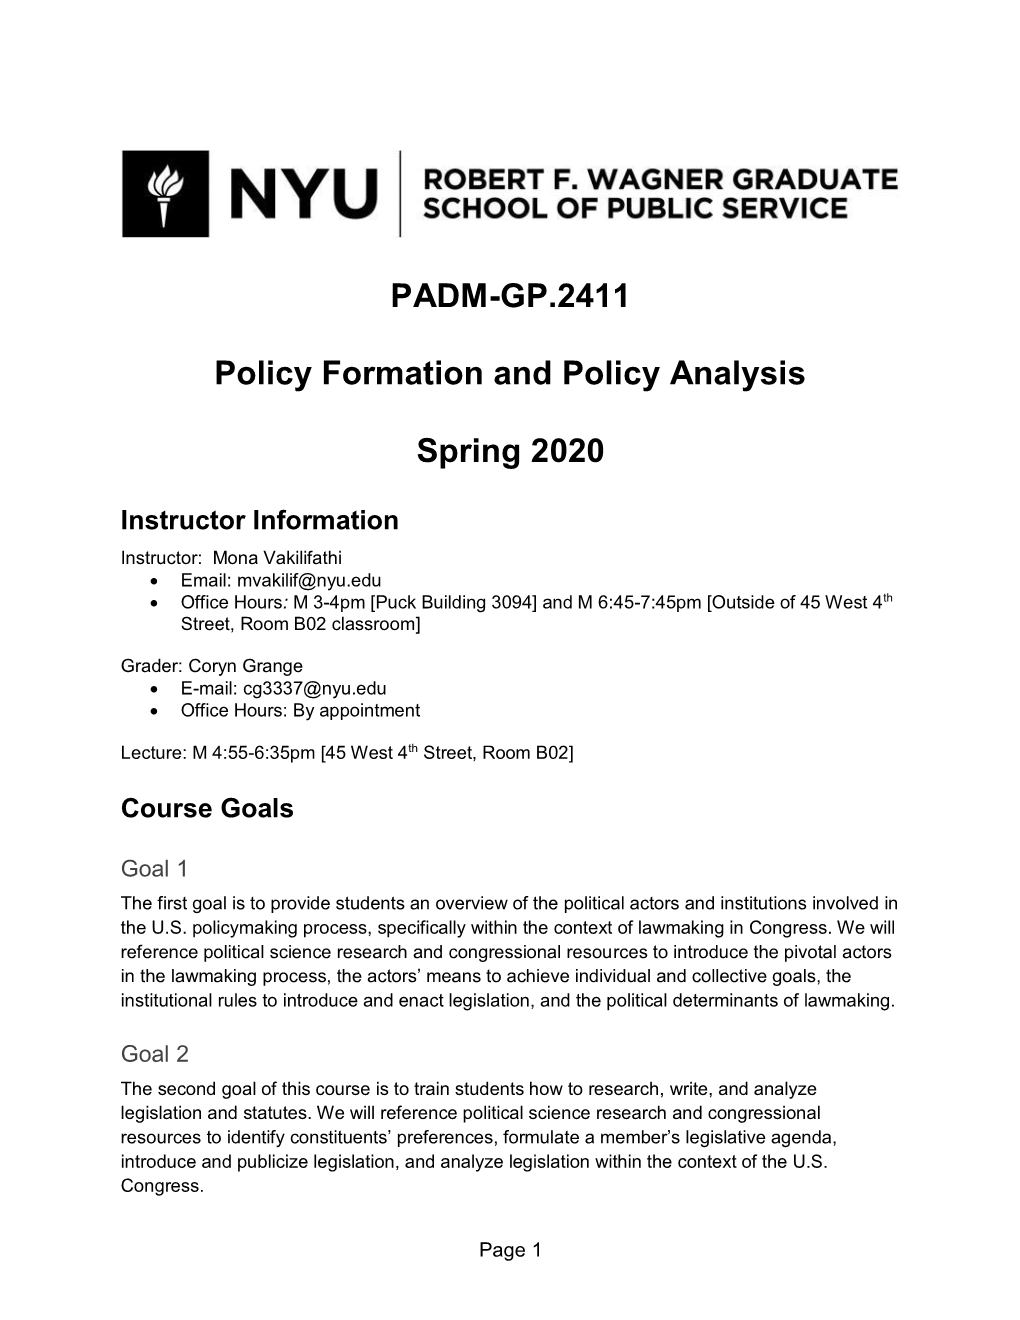 PADM-GP.2411 Policy Formation and Policy Analysis Spring 2020